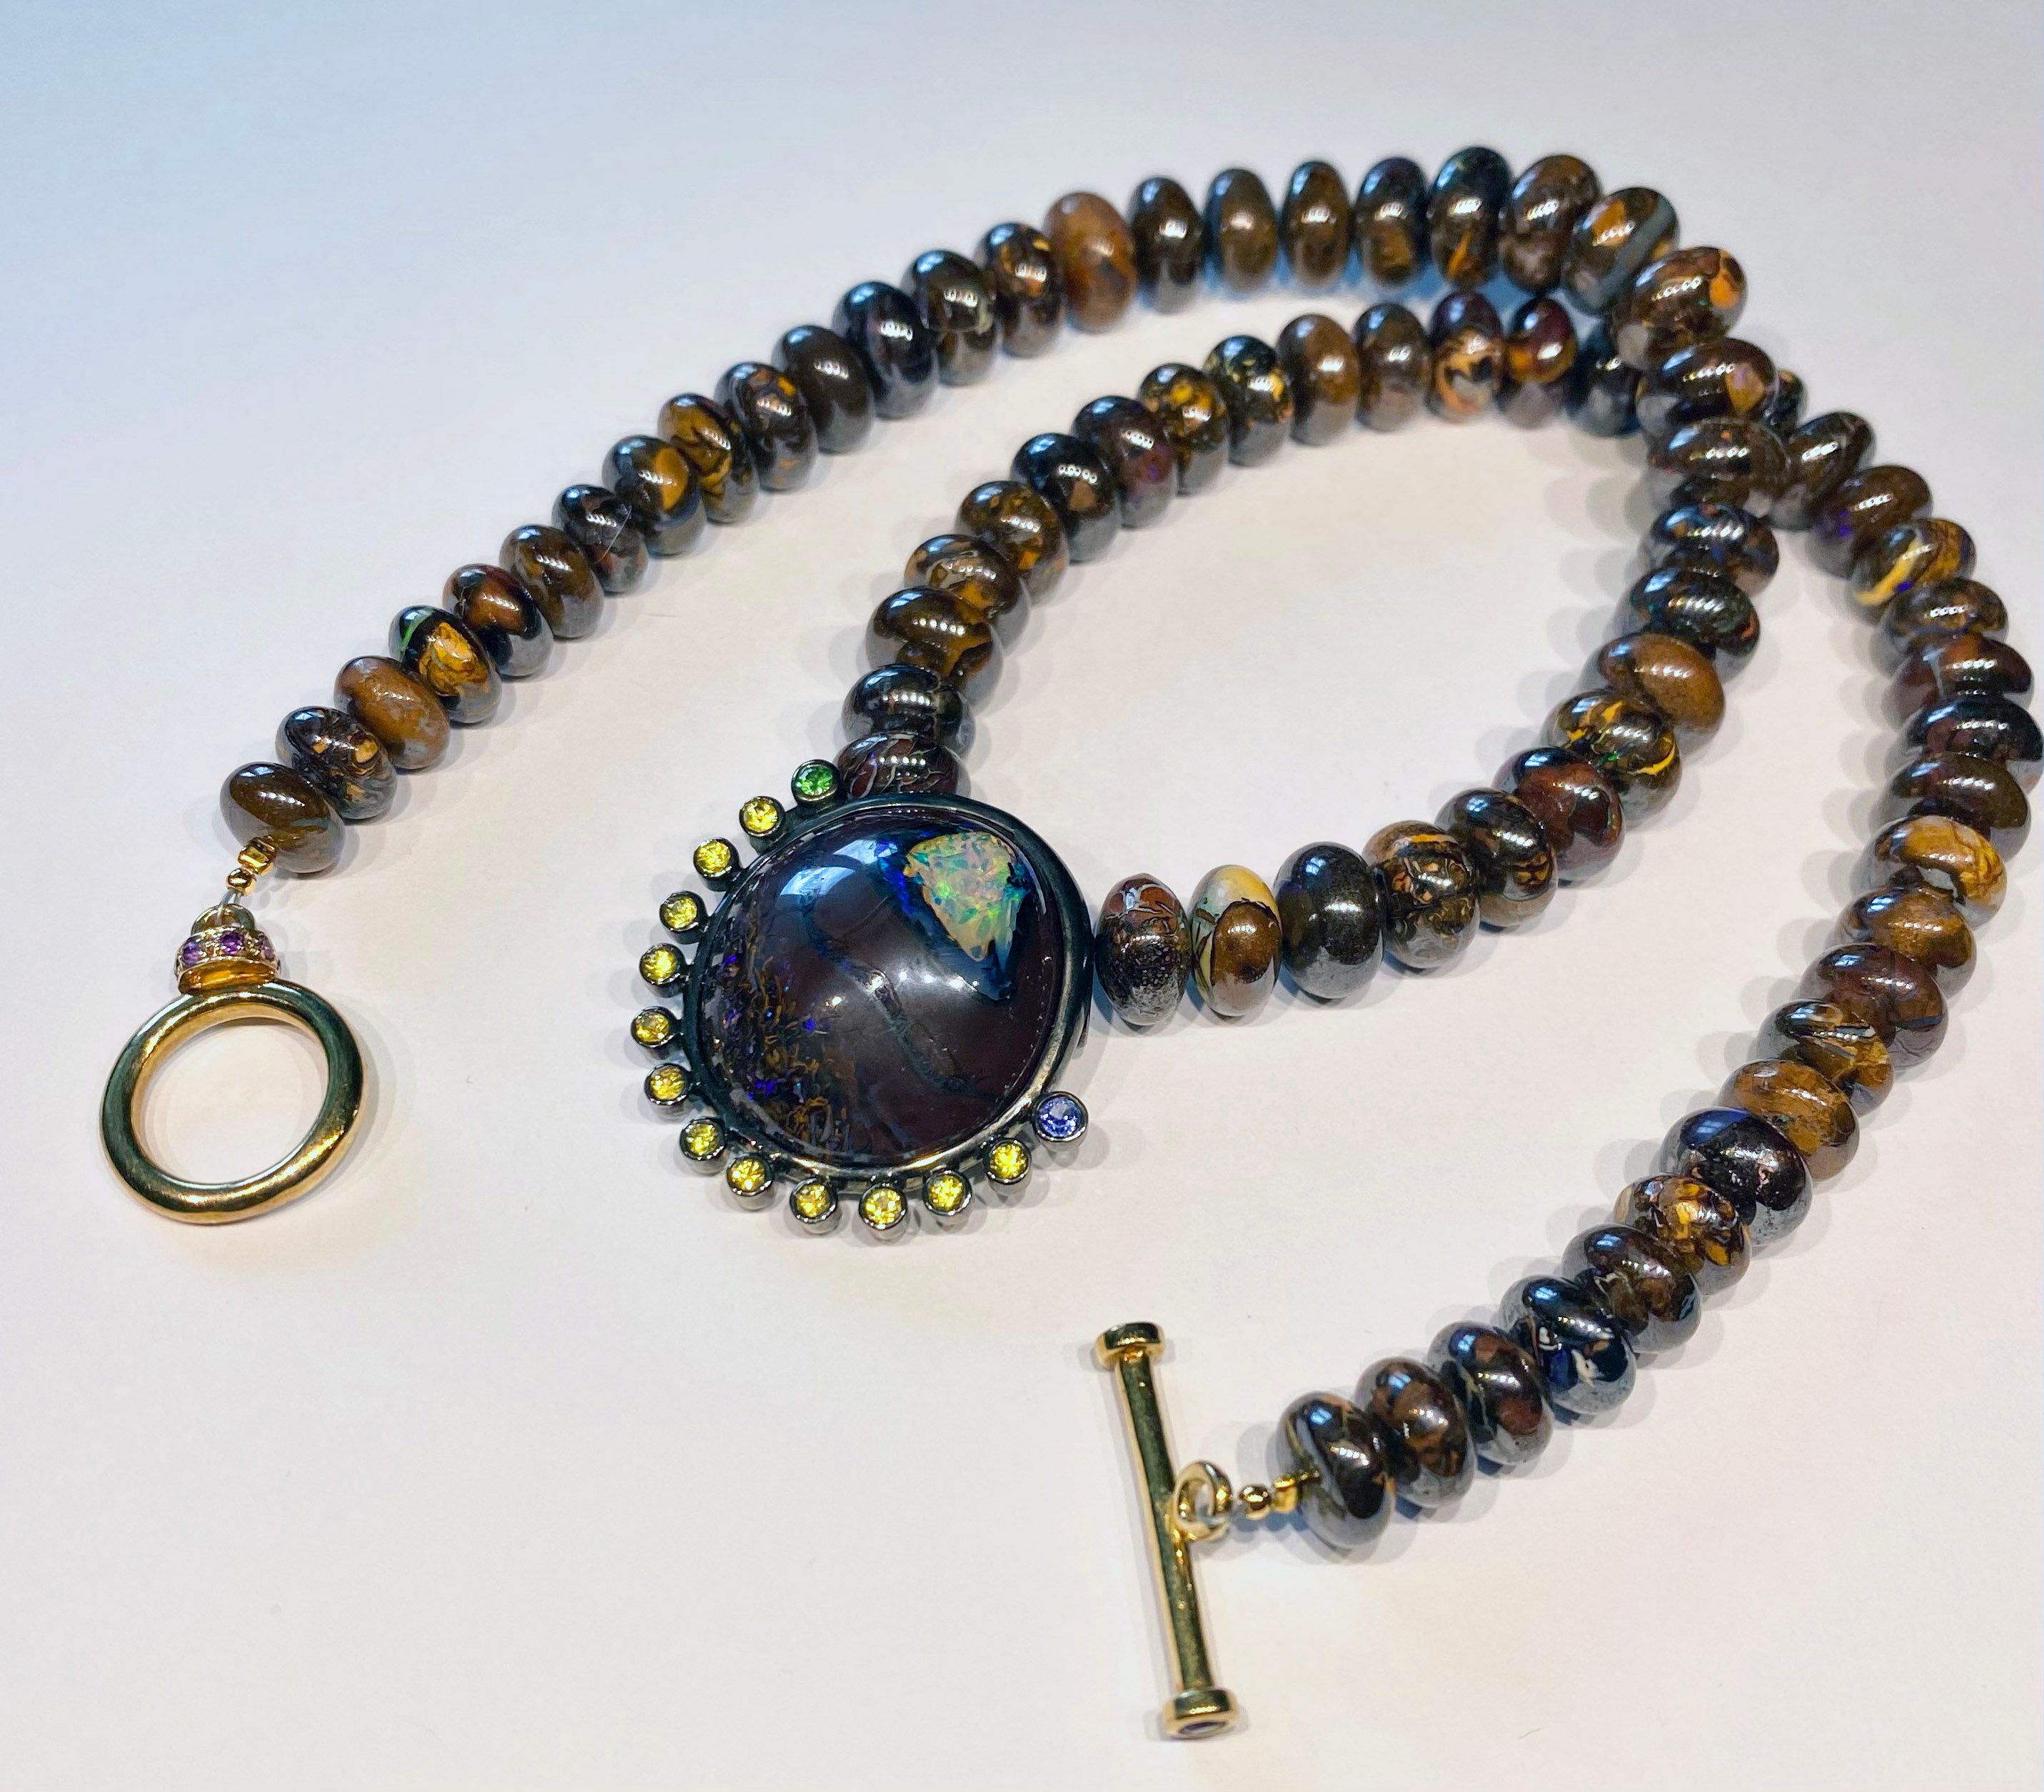 Boulder Opal, Sapphire and Tsavorite Pendant on a Beaded Boulder Opal Necklace. For Sale